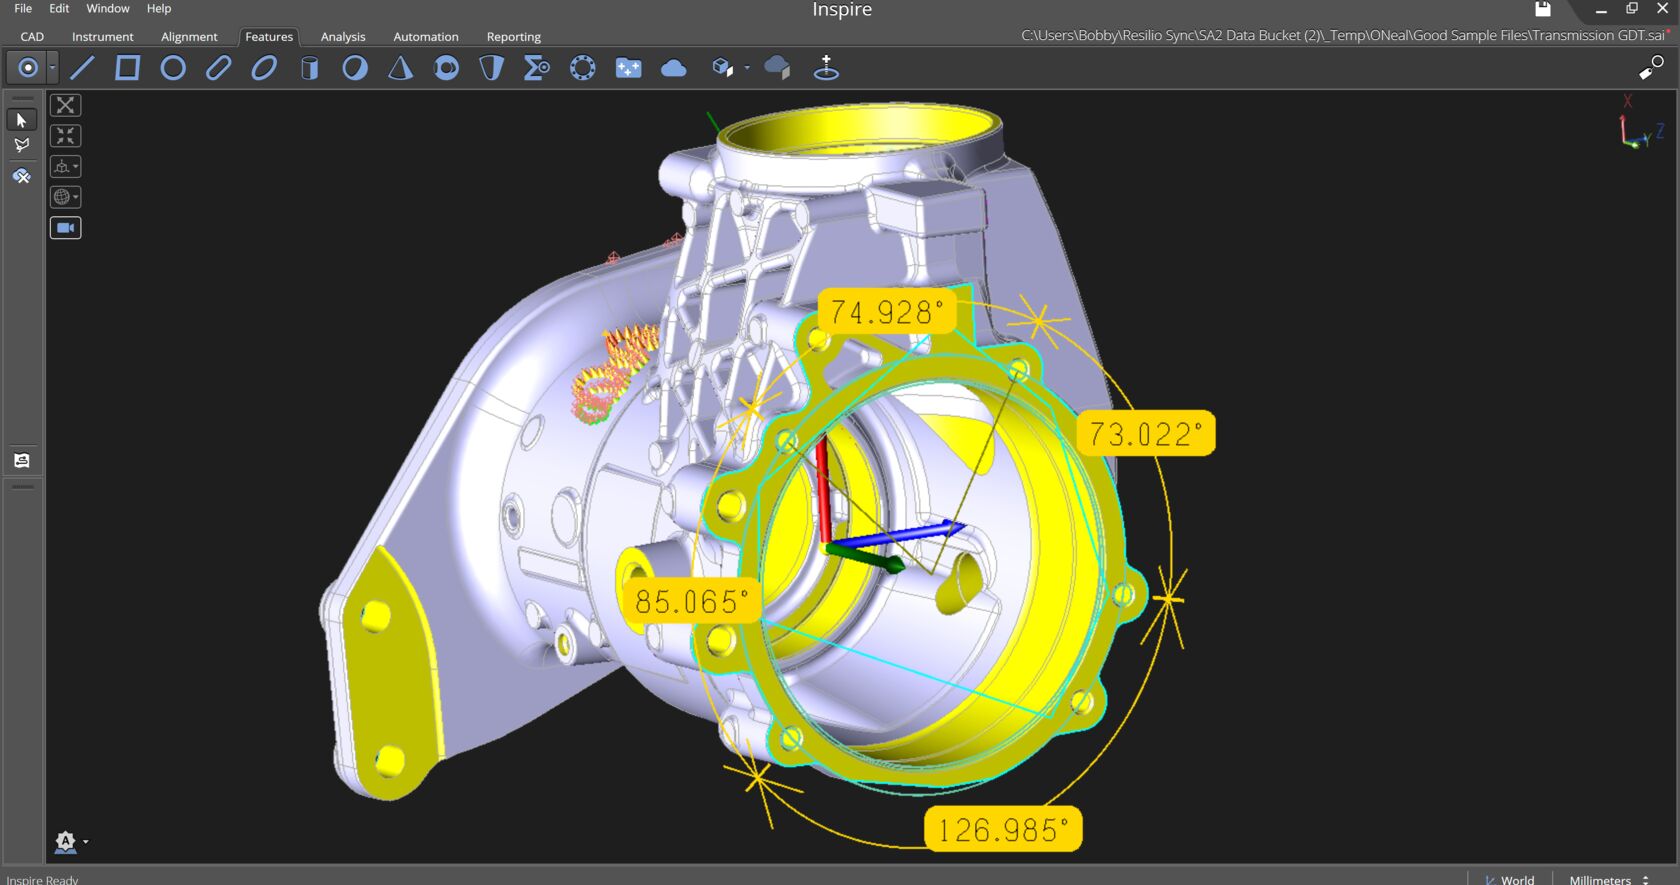 Vehicle transmission measured with Hexagon'a Inspire metrology software